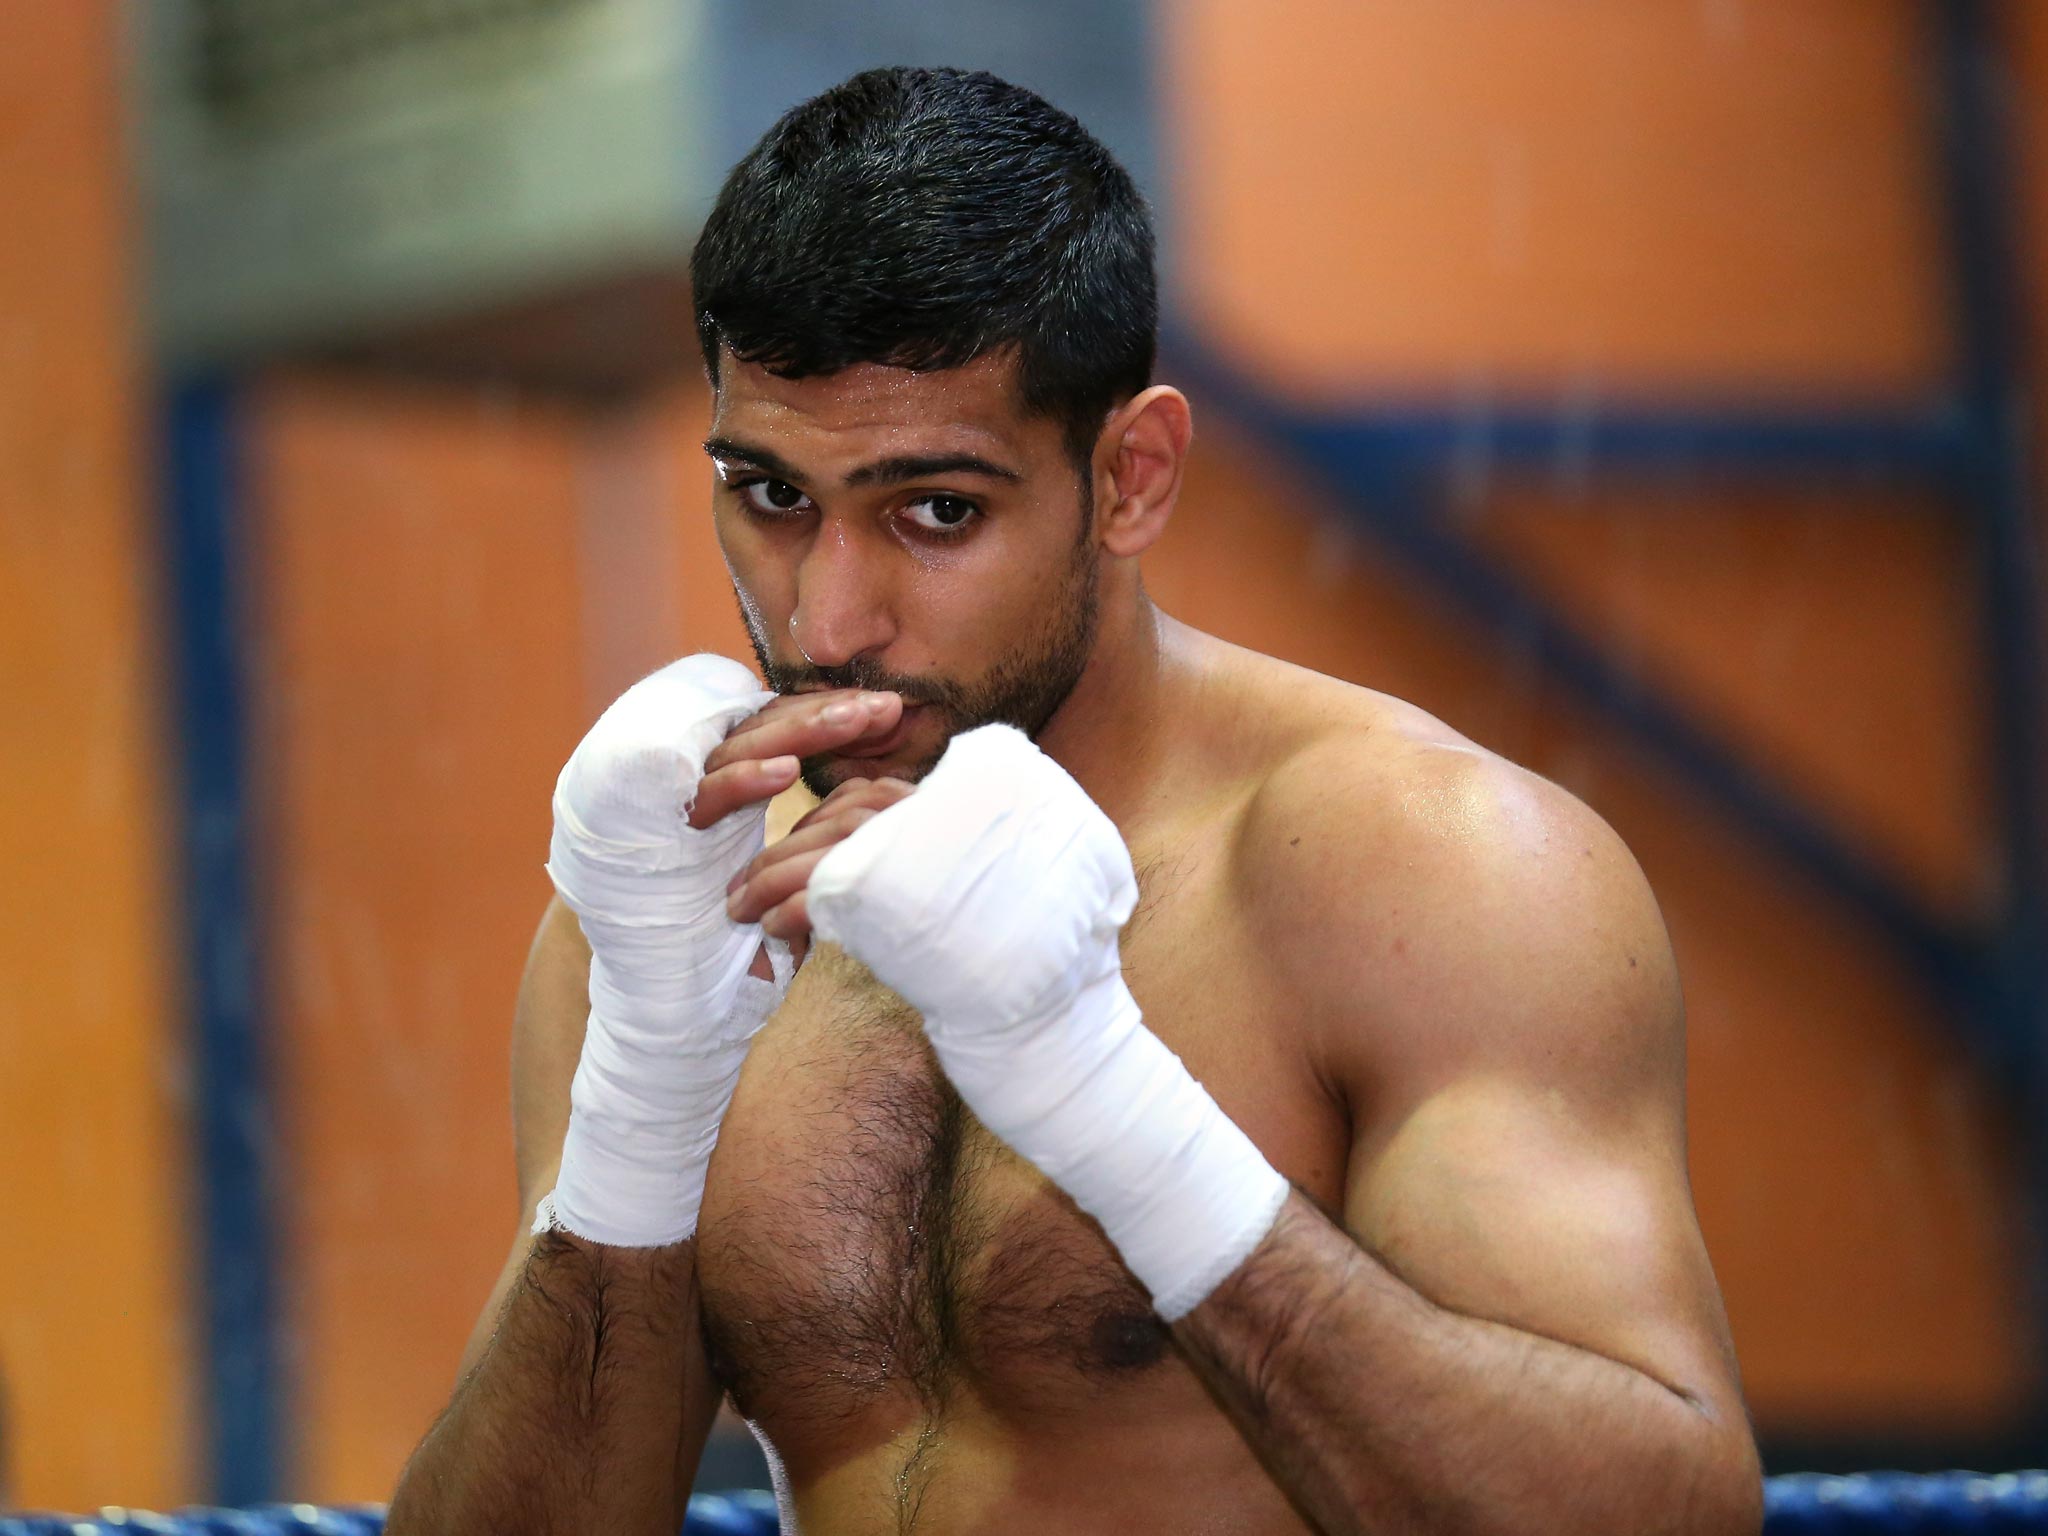 Amir Khan has promised to return 'stronger, more skilled and smarter' in his return to the ring against Luis Collazo